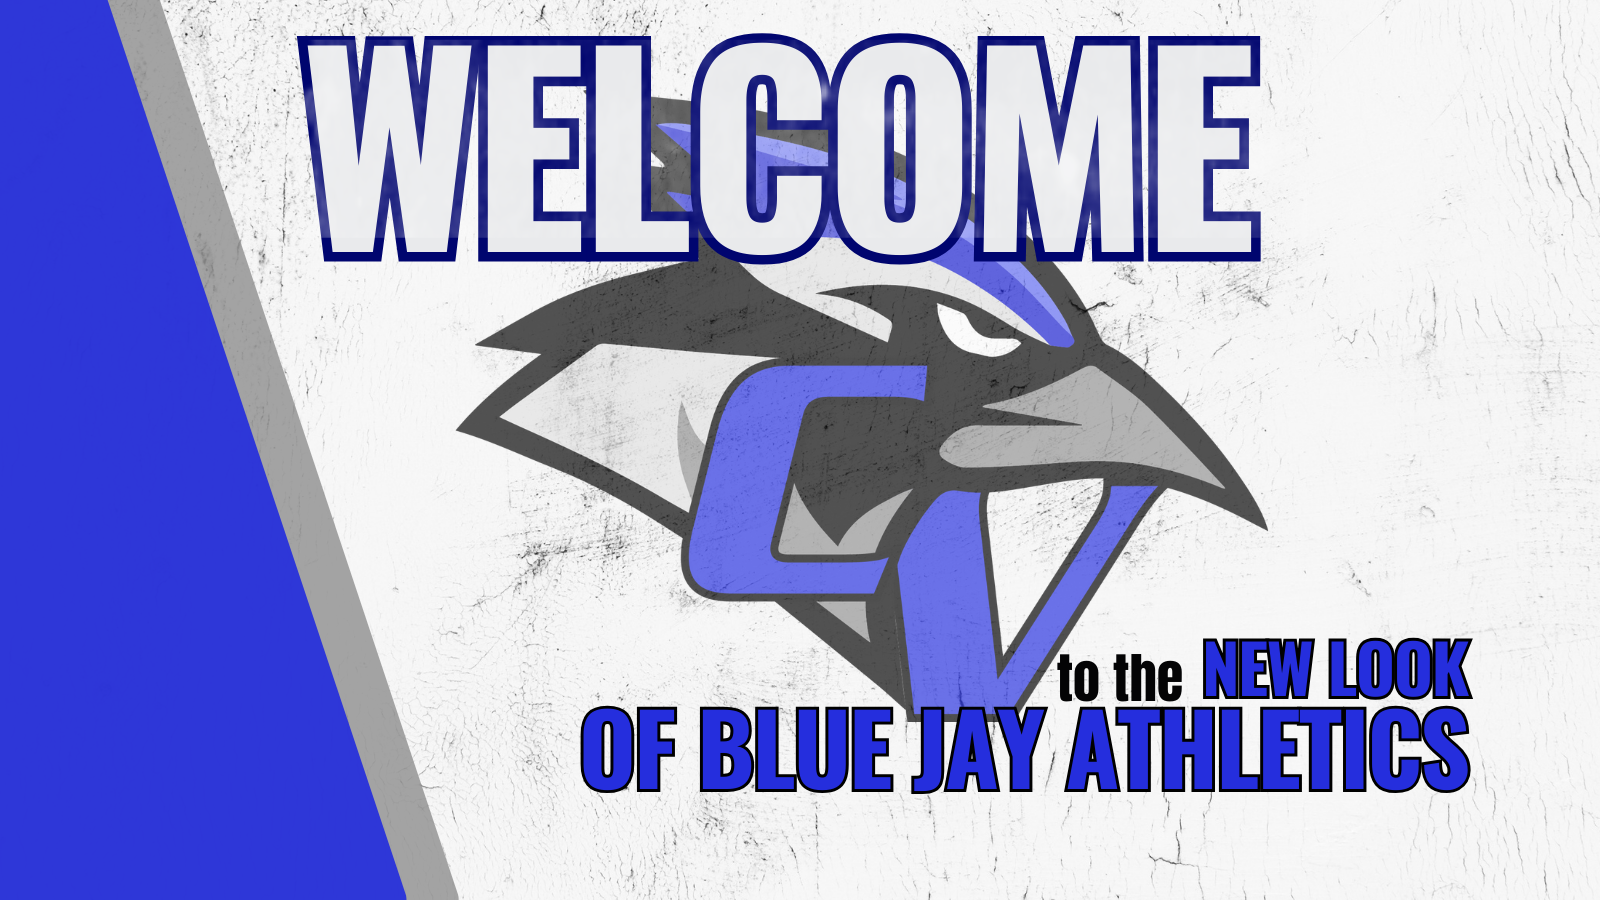 1710254941_CopyofOleyValleyWelcometo1280x320pxTwitterPost13.png - Image for 🎉 Exciting News for Blue Jay Athletics Fans! 🎉